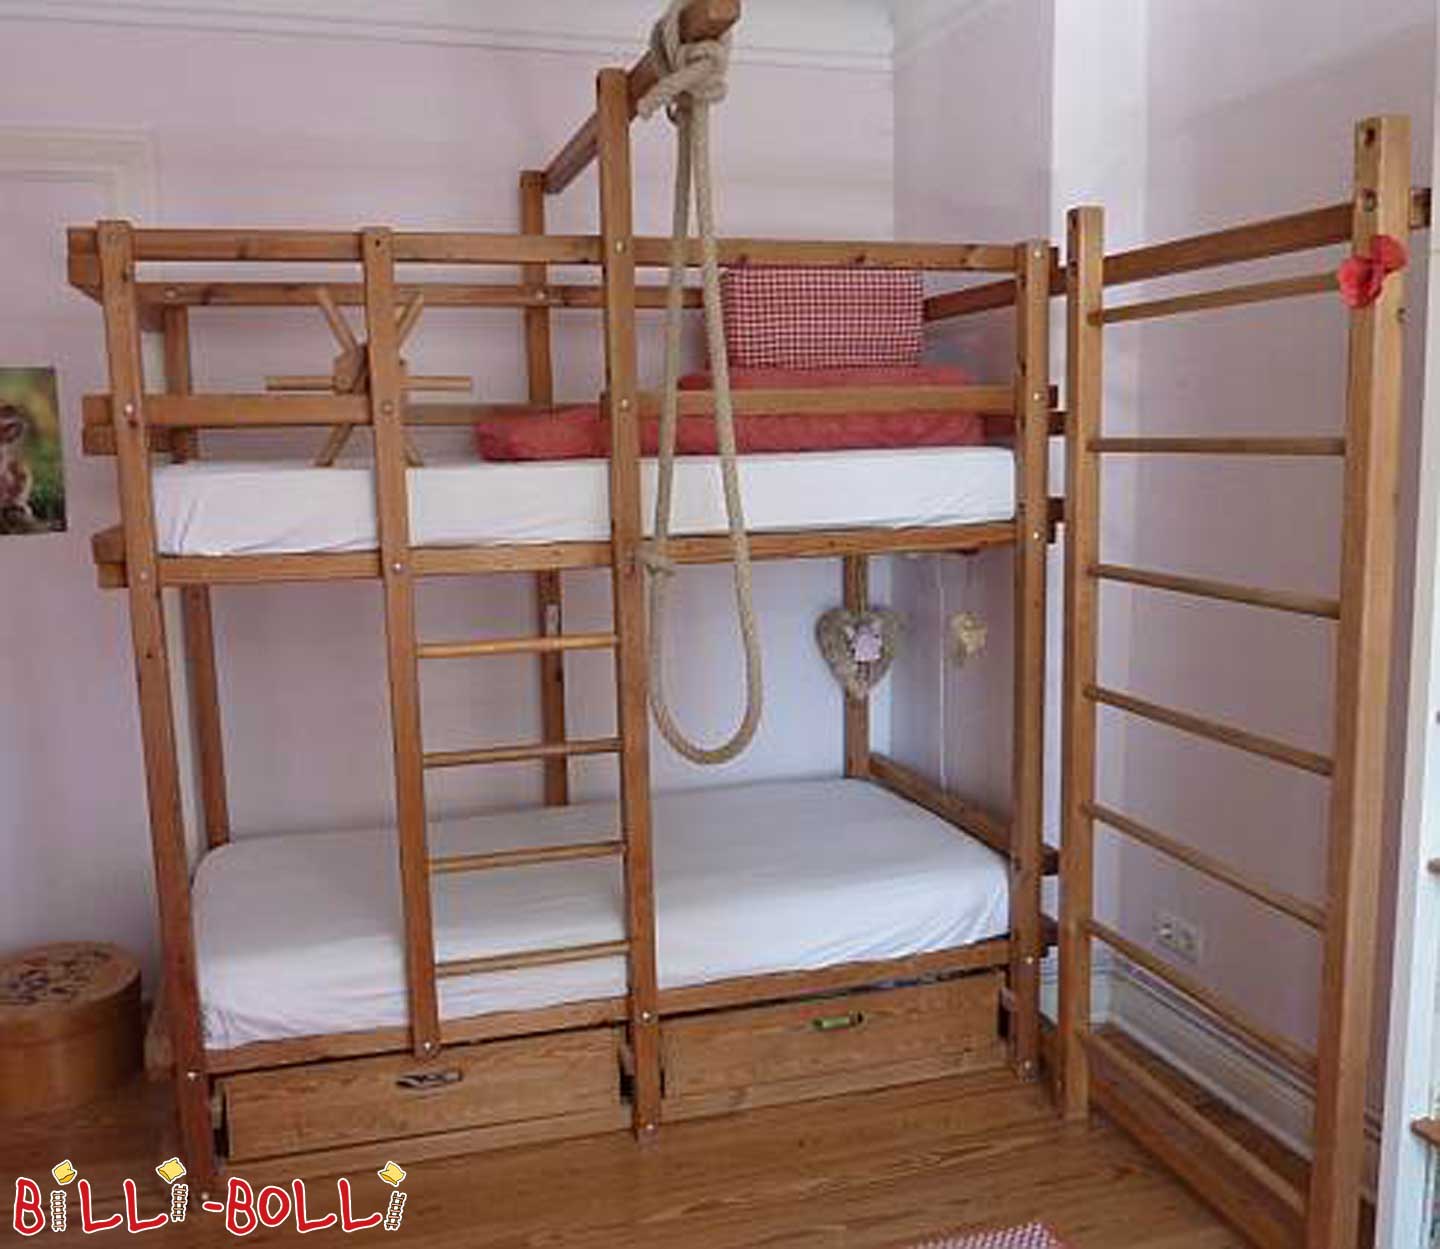 Pirate bed (Category: second hand kids’ furniture)